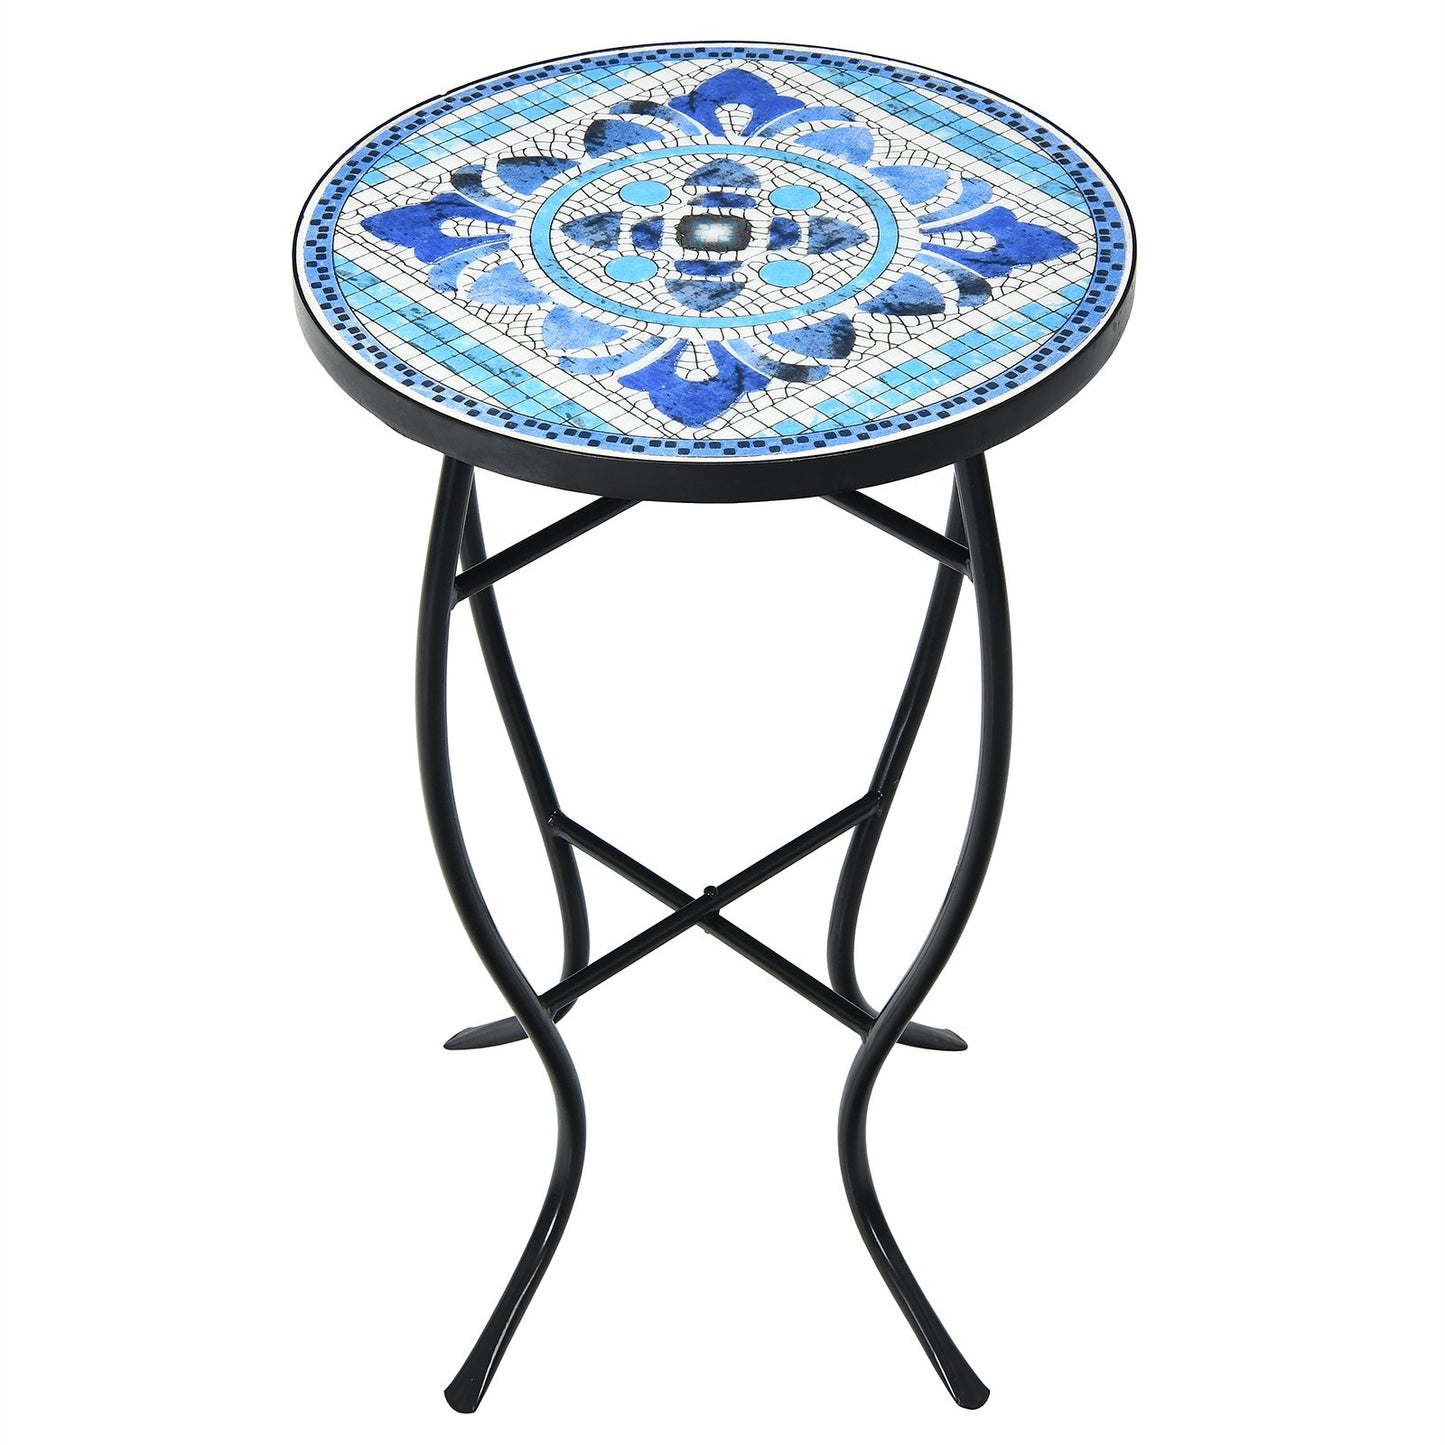 Mosaic Side Round Balcony Bistro End Table with Ceramic Tile Top, Multicolor